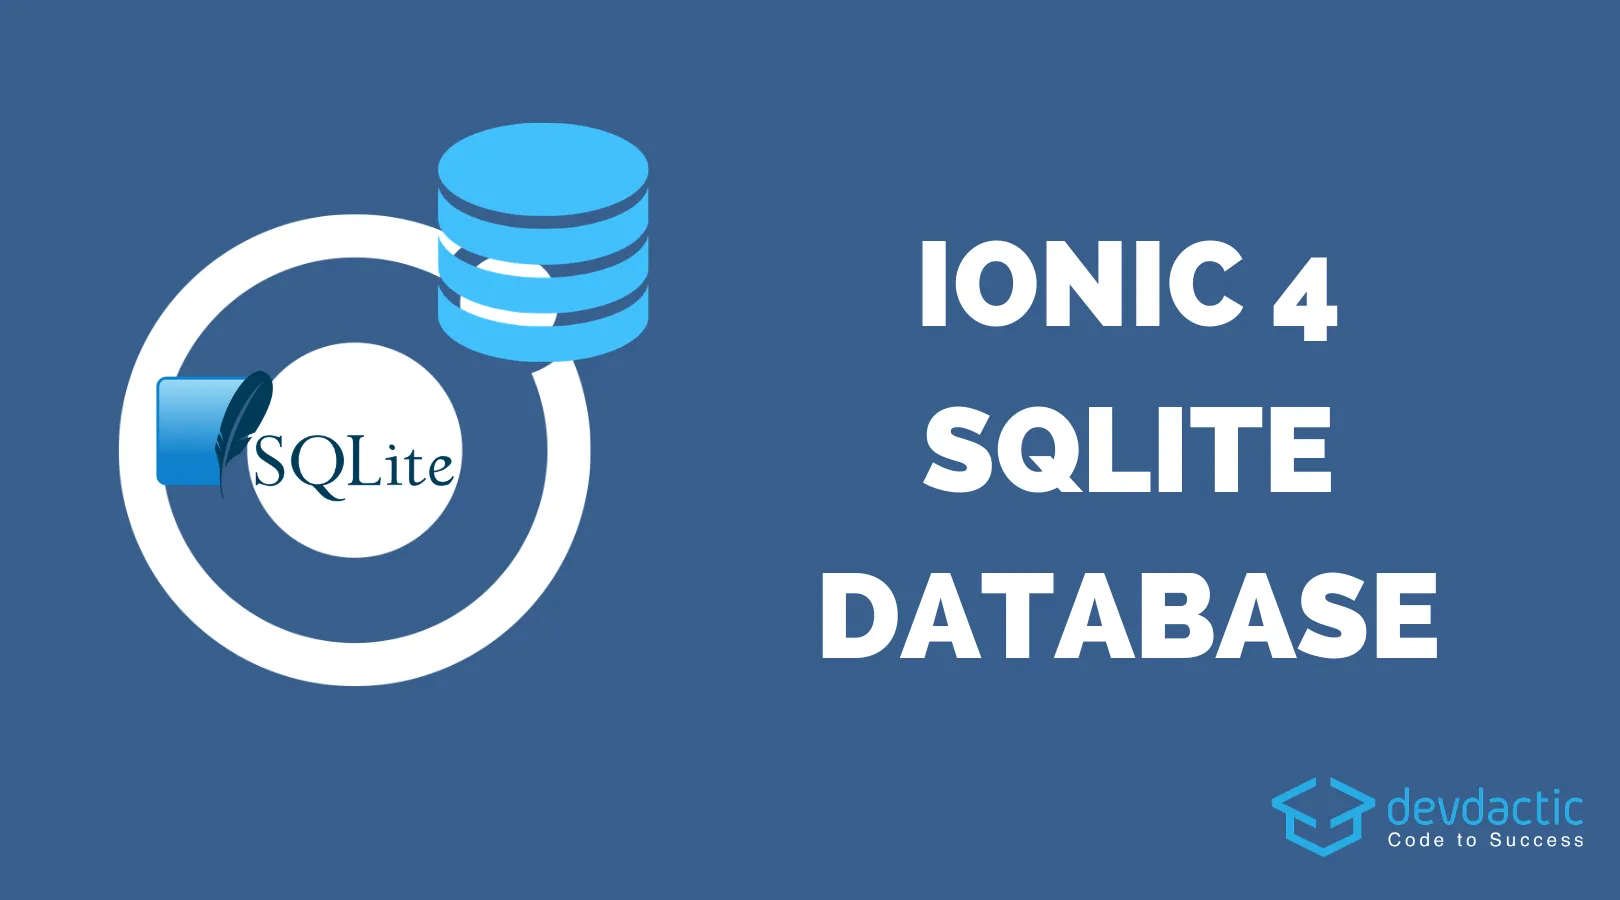 How to Build an Ionic 4 App with SQLite Database & Queries (And Debug It!)